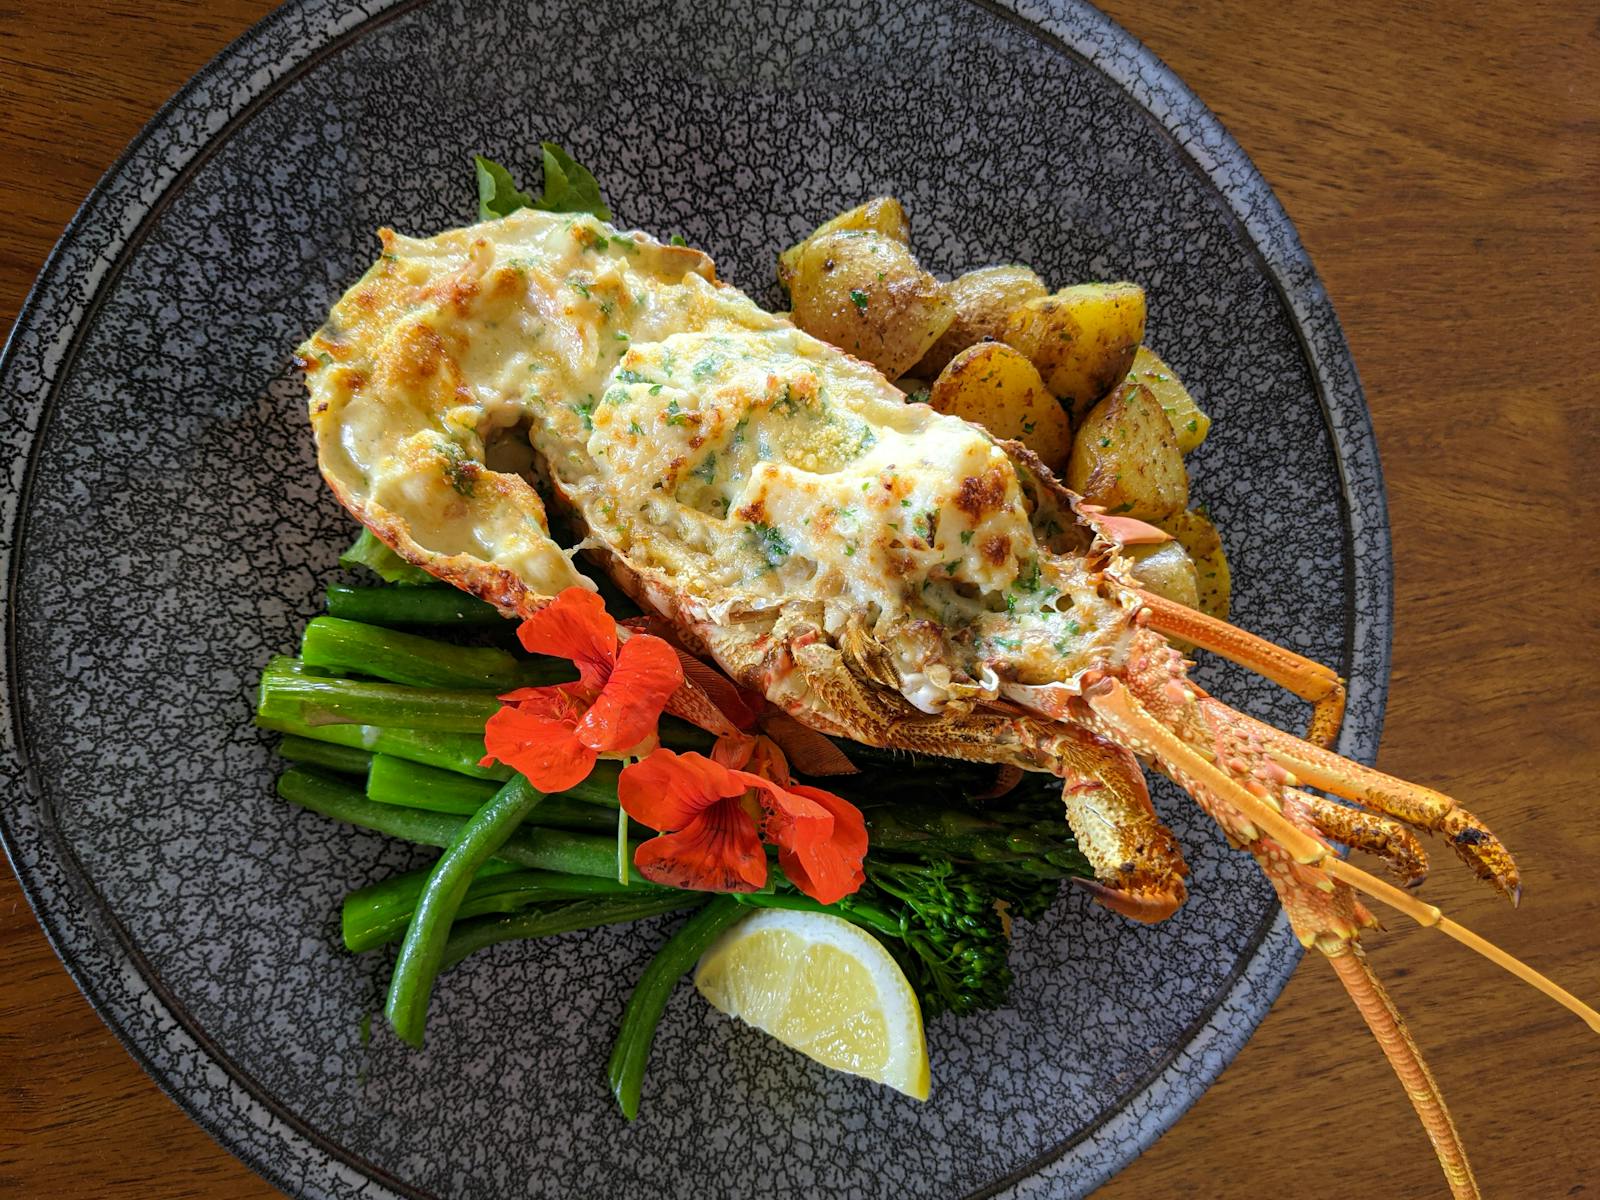 A dish featuring Tasmanian Southern Rock Lobster with mornay sauce and accompanying sides.